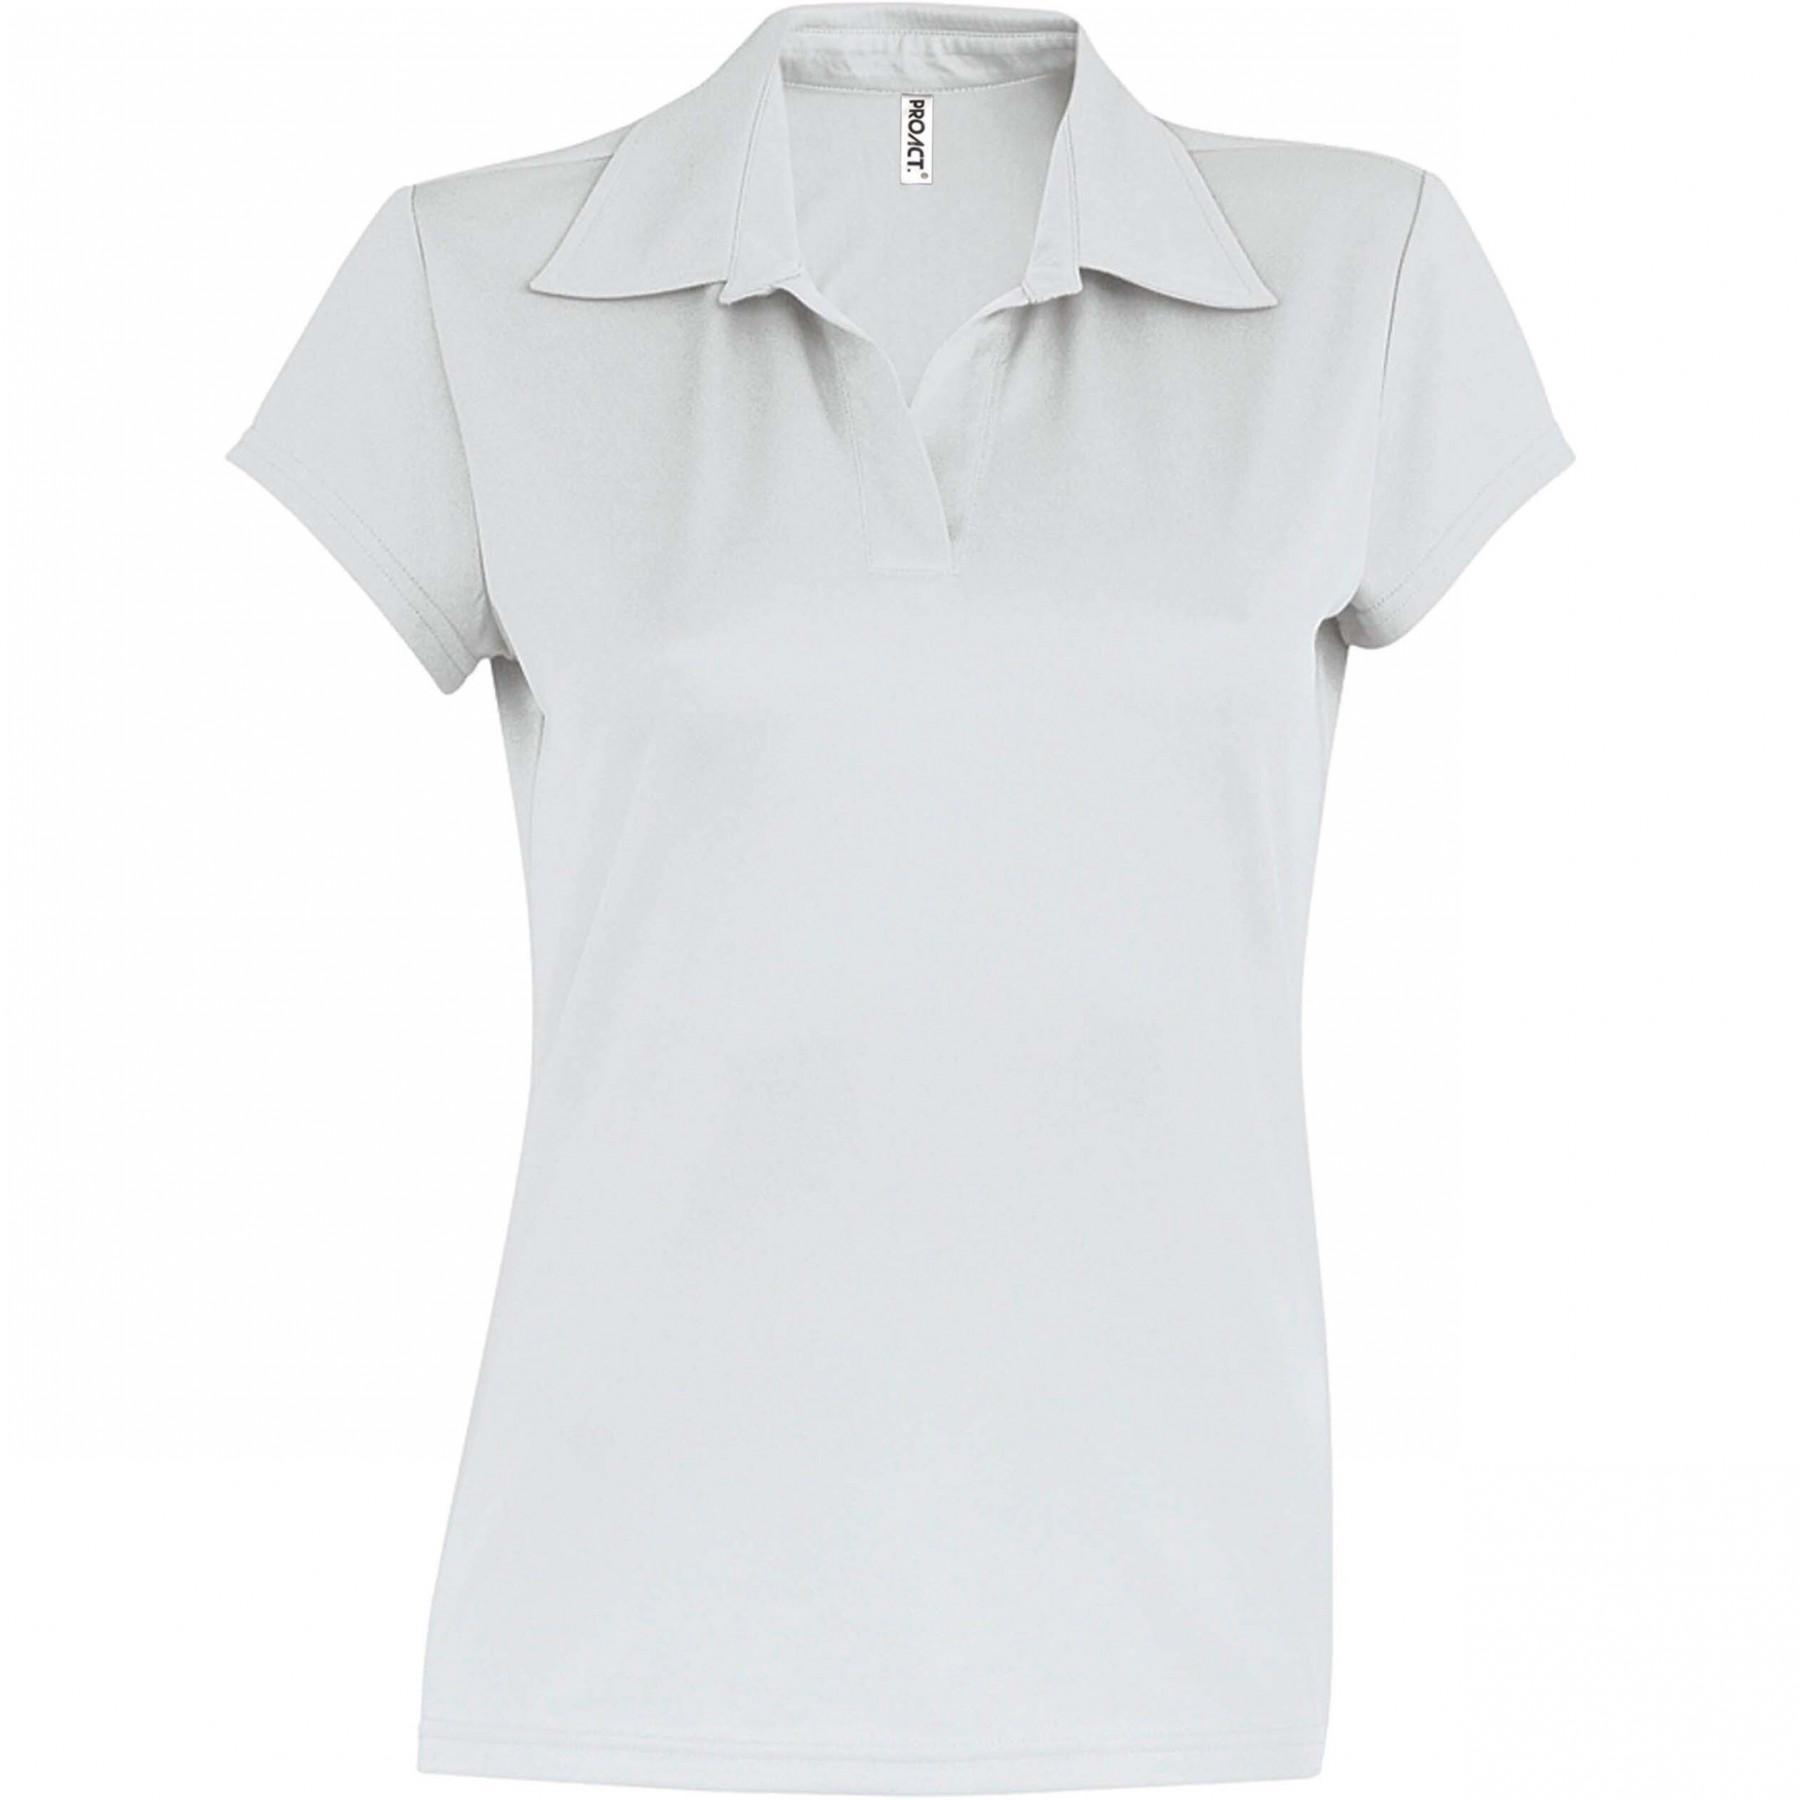 Polo femme manches courtes Sport Proact blanc